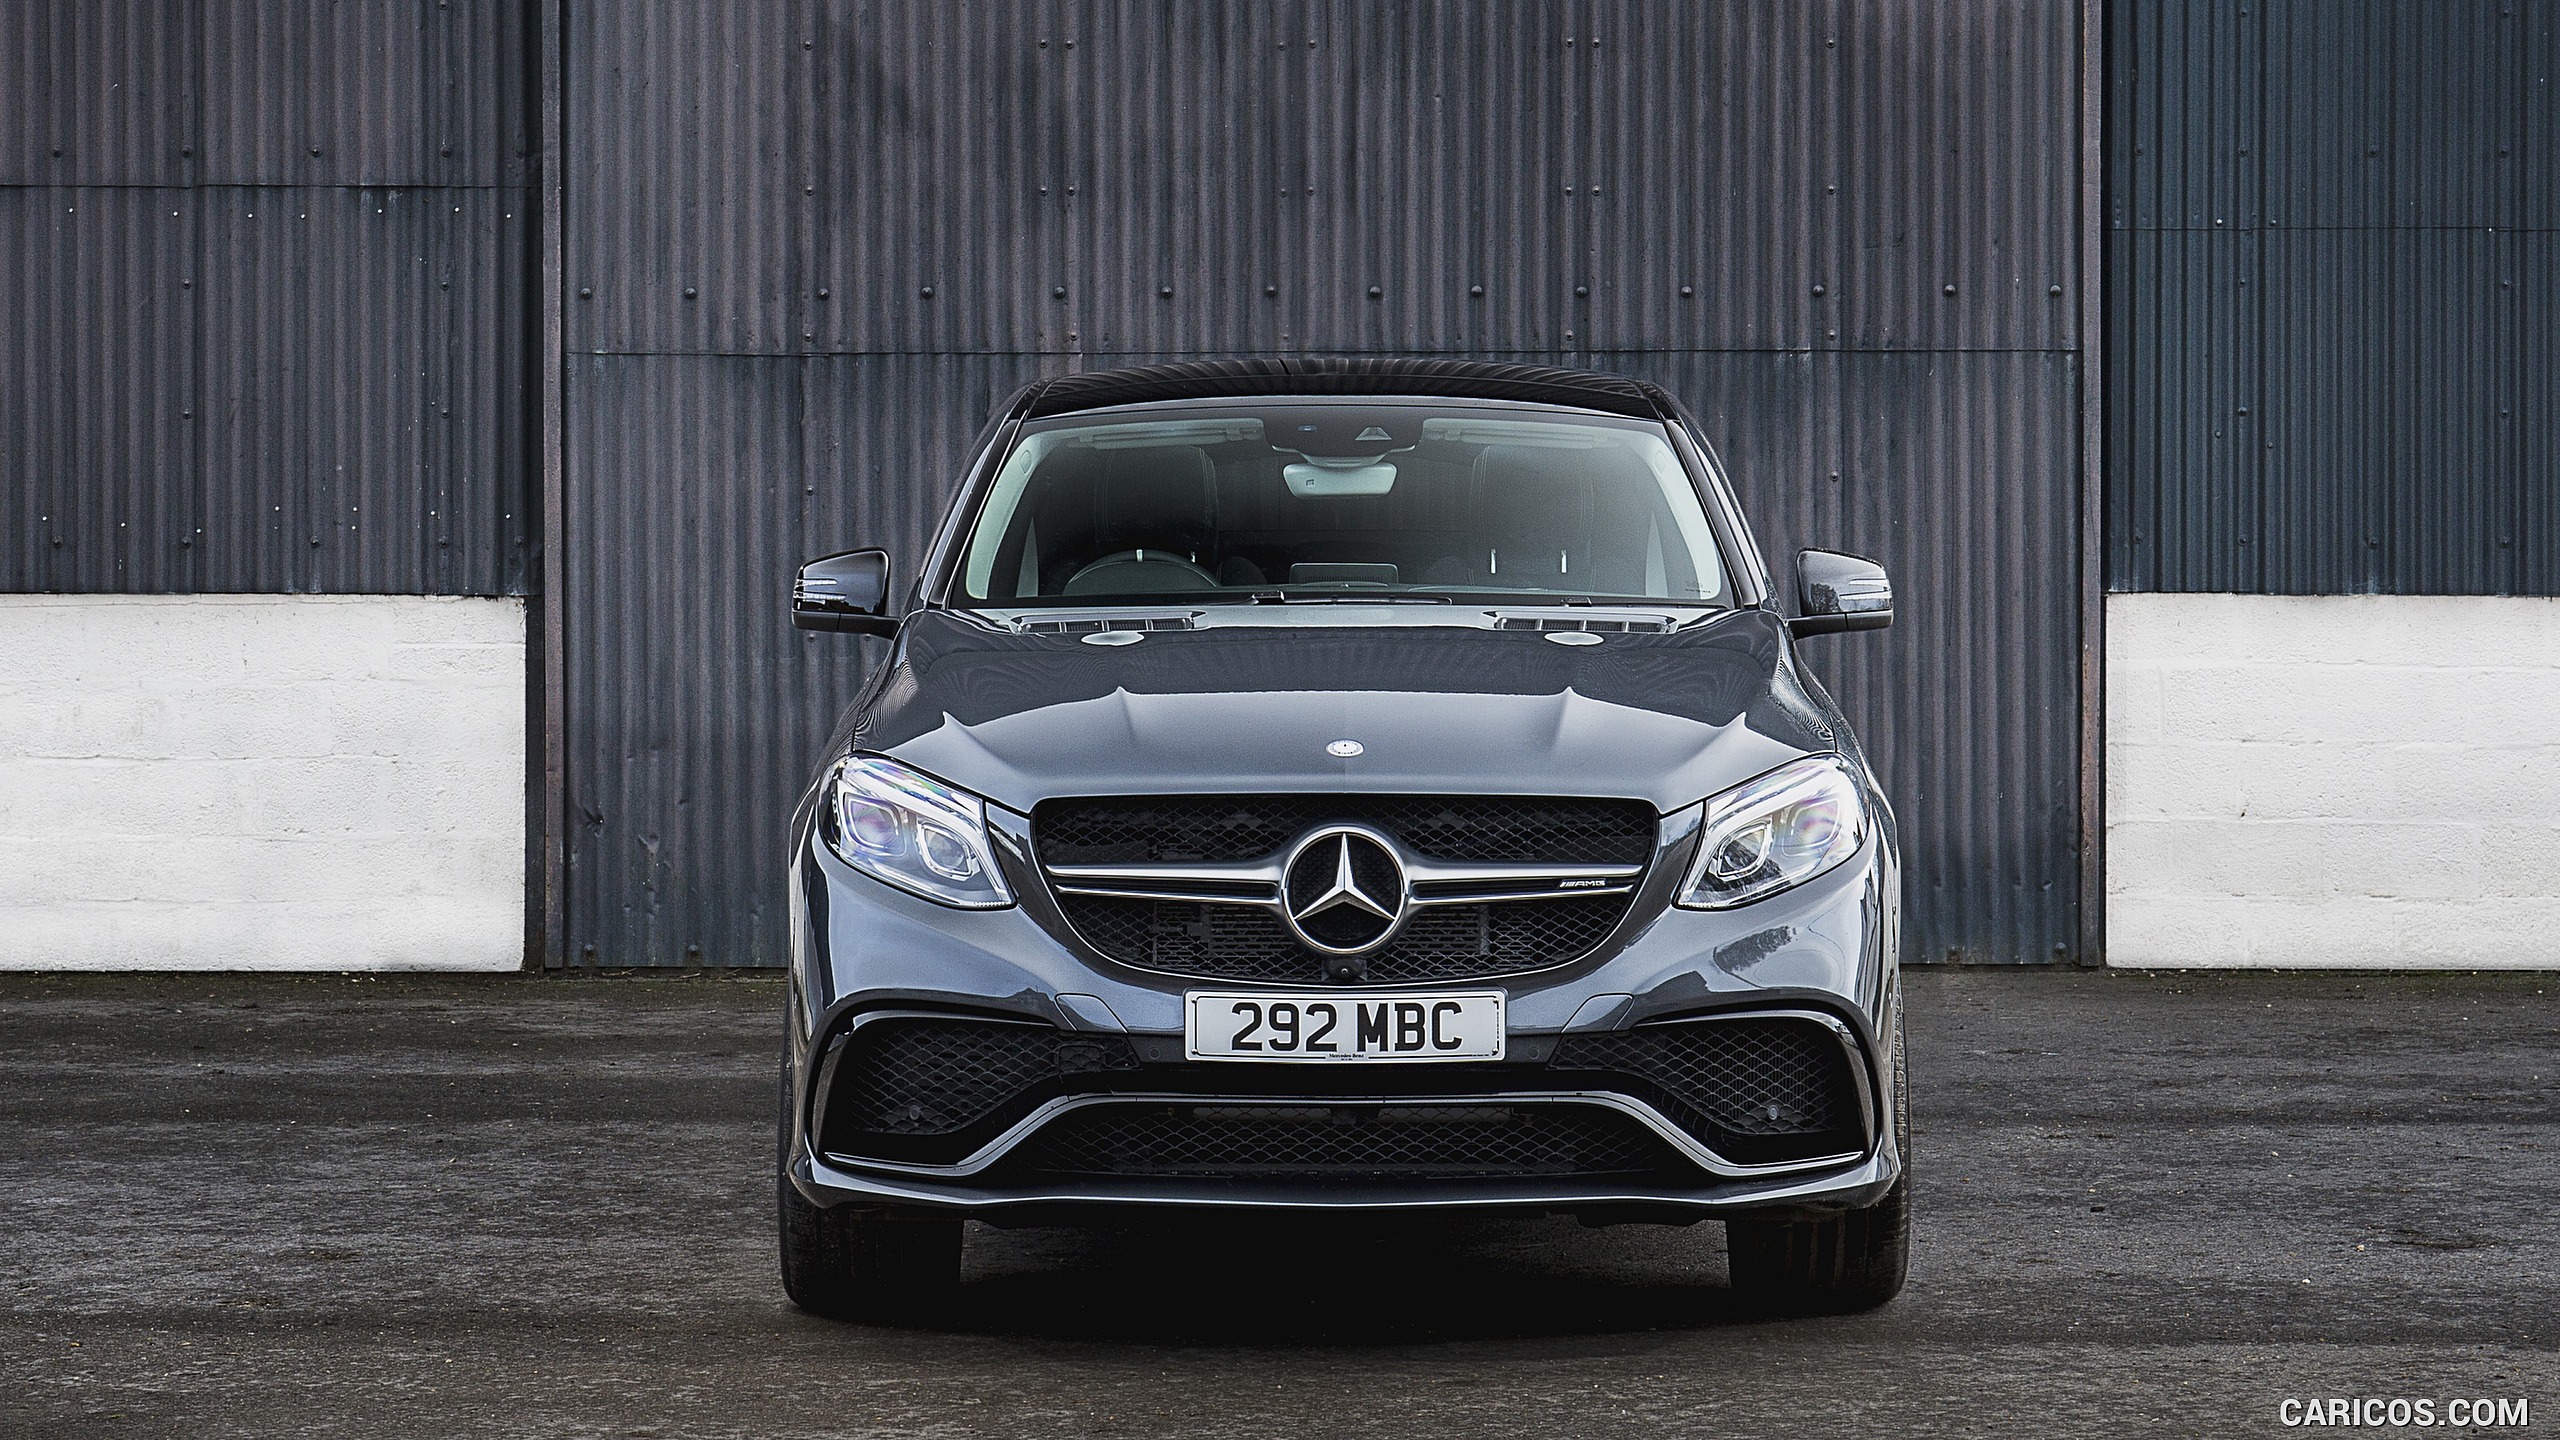 2016 Mercedes-AMG GLE 63 S Coupe (UK-Spec) - Front, #57 of 65